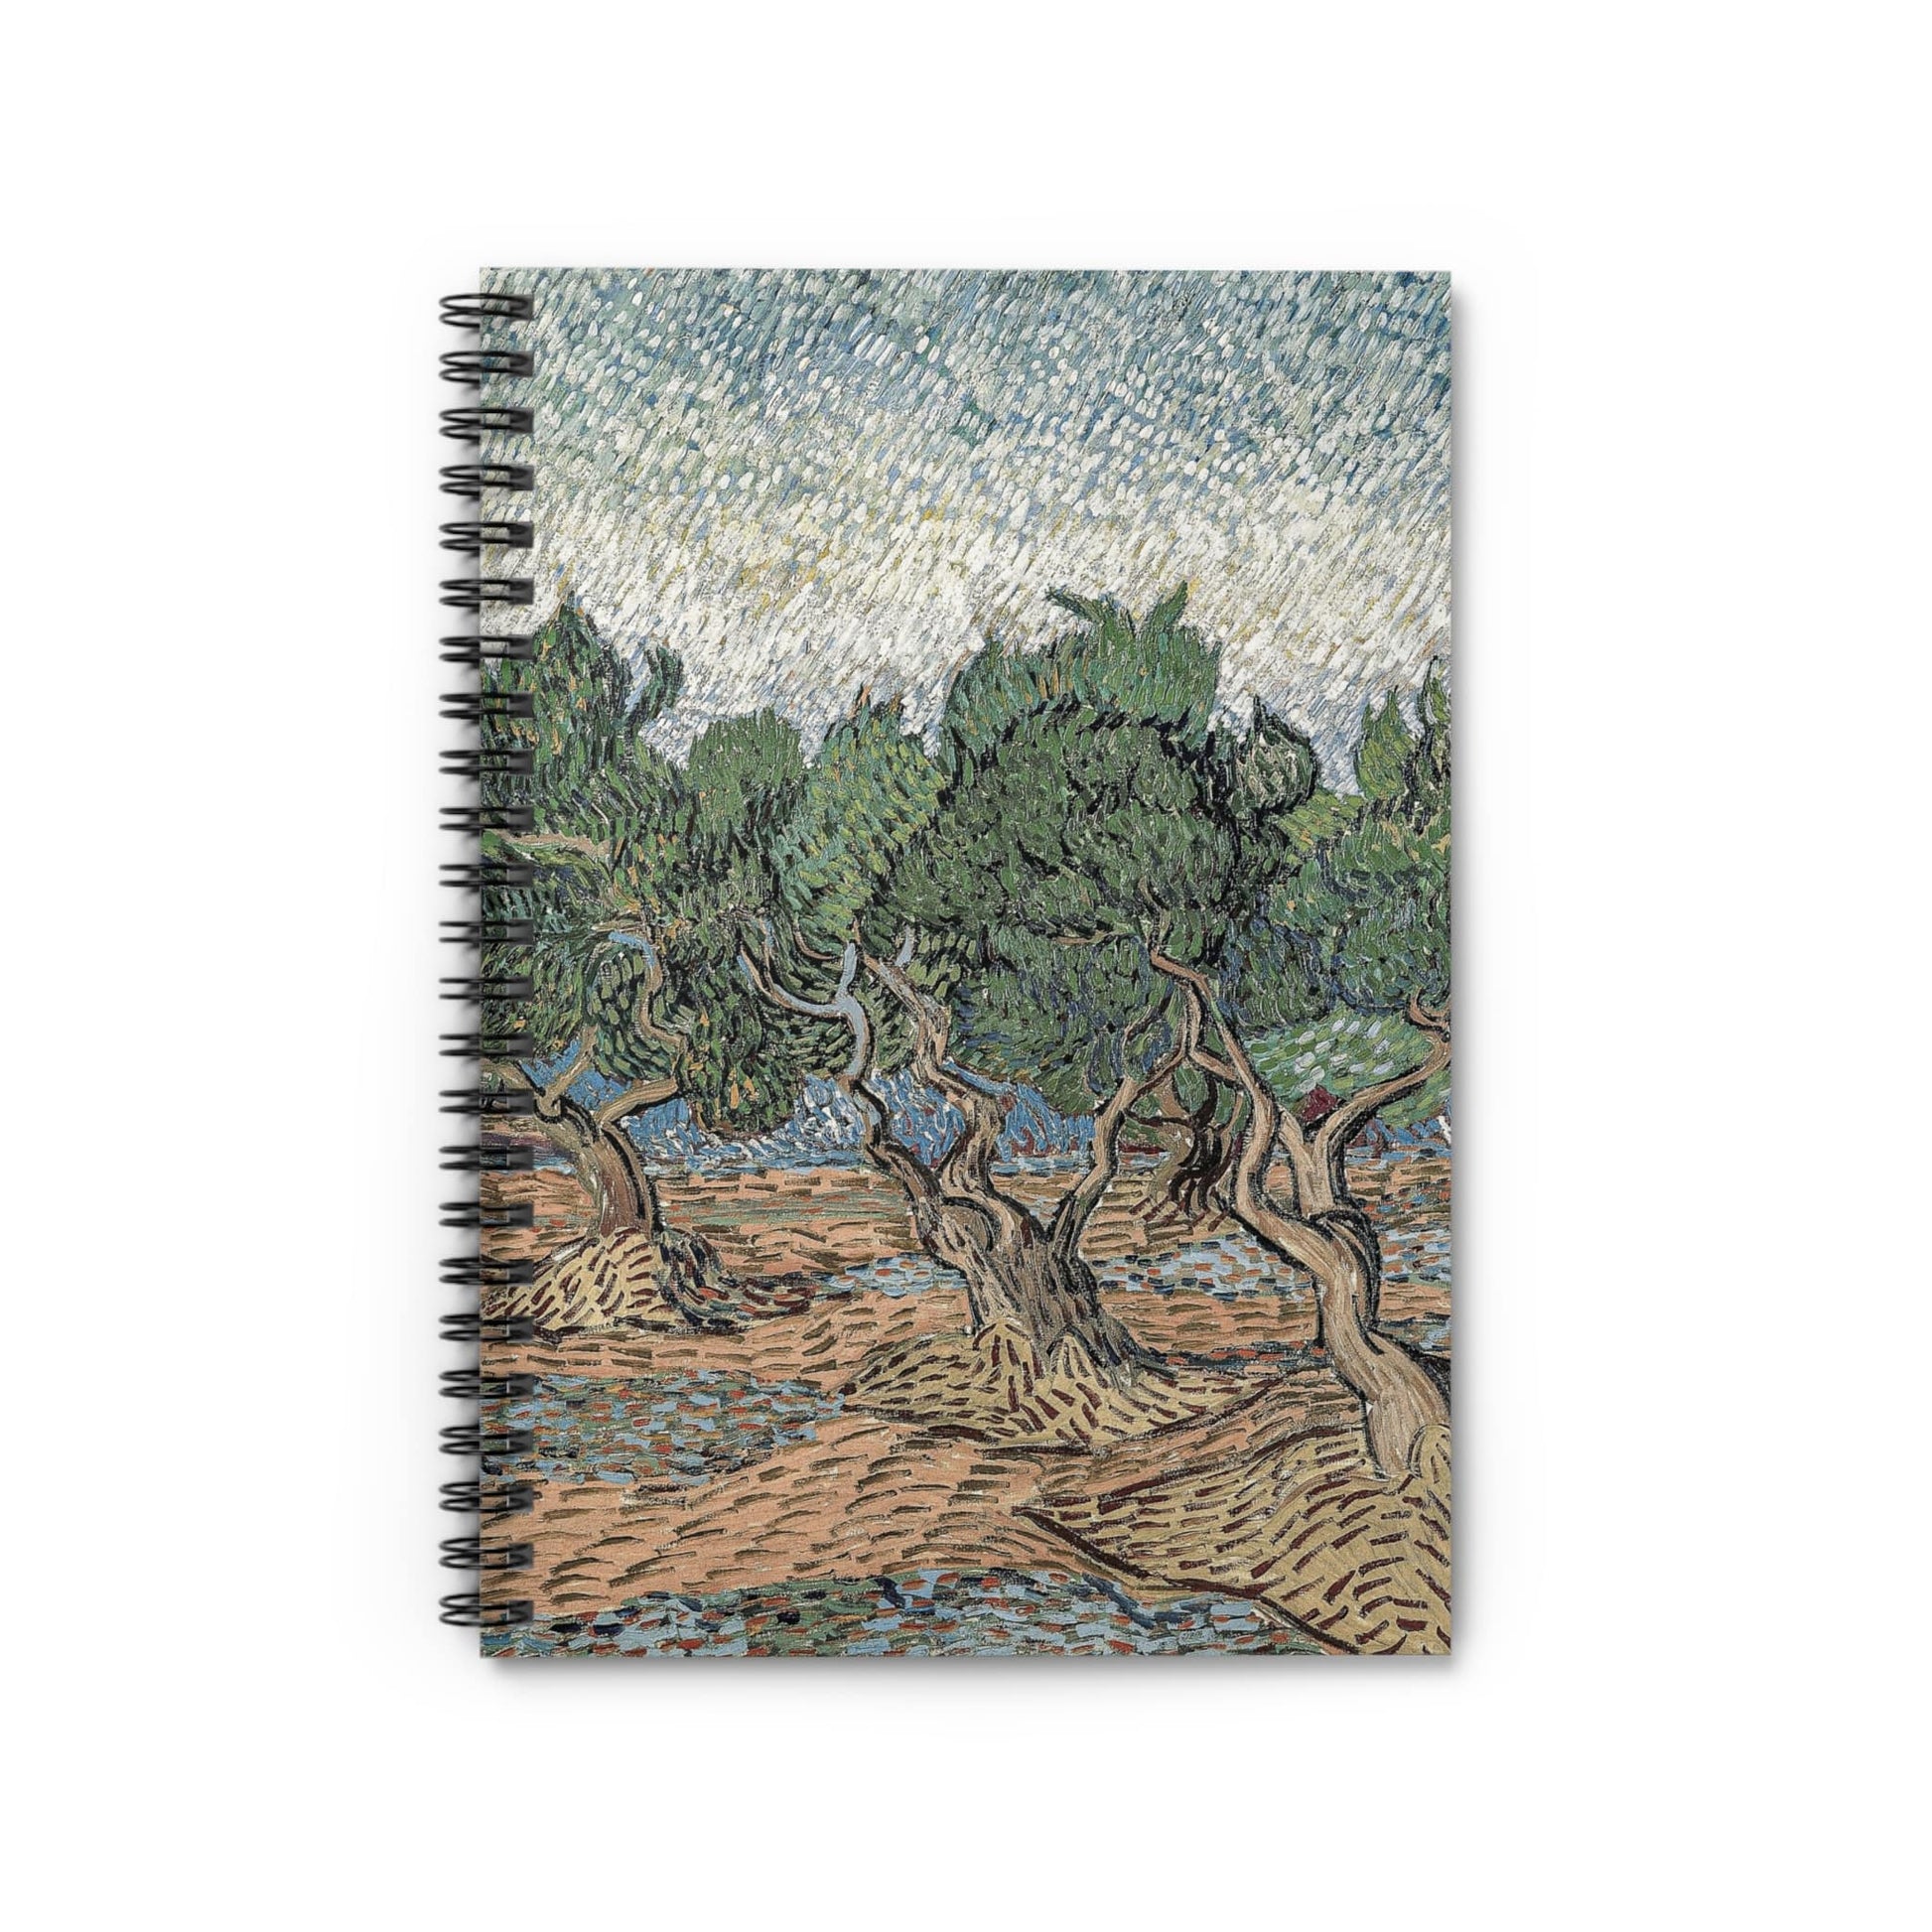 Relaxing Tree Notebook with Abstract Landscape cover, great for journaling and planning, highlighting a relaxing abstract tree landscape.